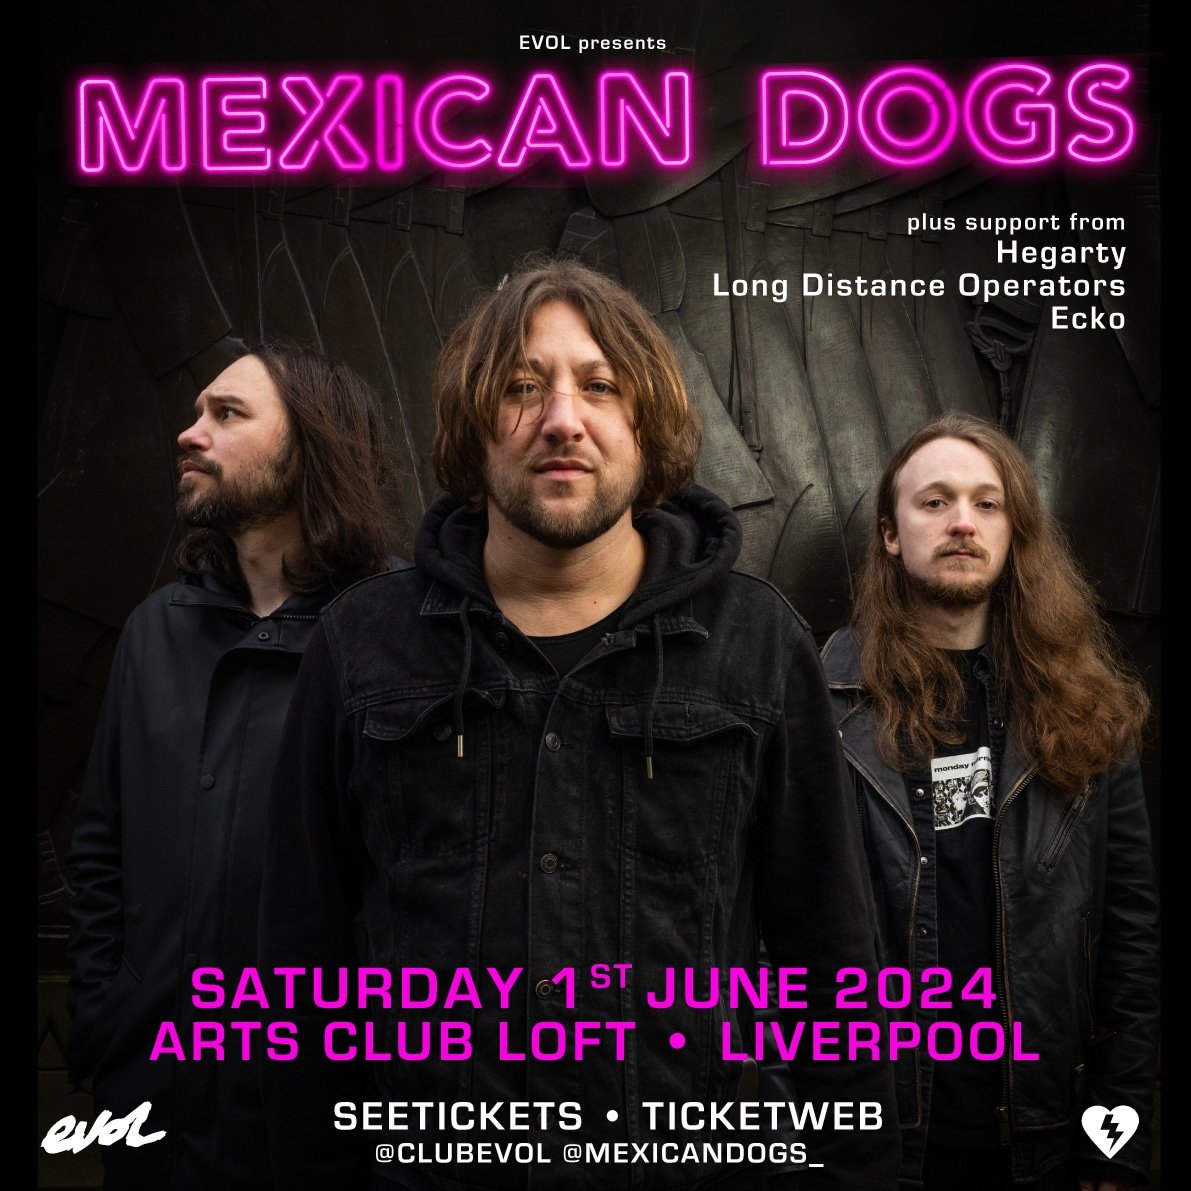 ***RESCHEDULED SHOW*** We've been forced to move our show with @mexicandogs_ @hegartyofficial, Long Distance Operators and @weareecko_ to Saturday 1st June 2024 and it will now take place at @artsclublpool doors now 6pm & a new age restriction of 14+ - all original tickets valid.